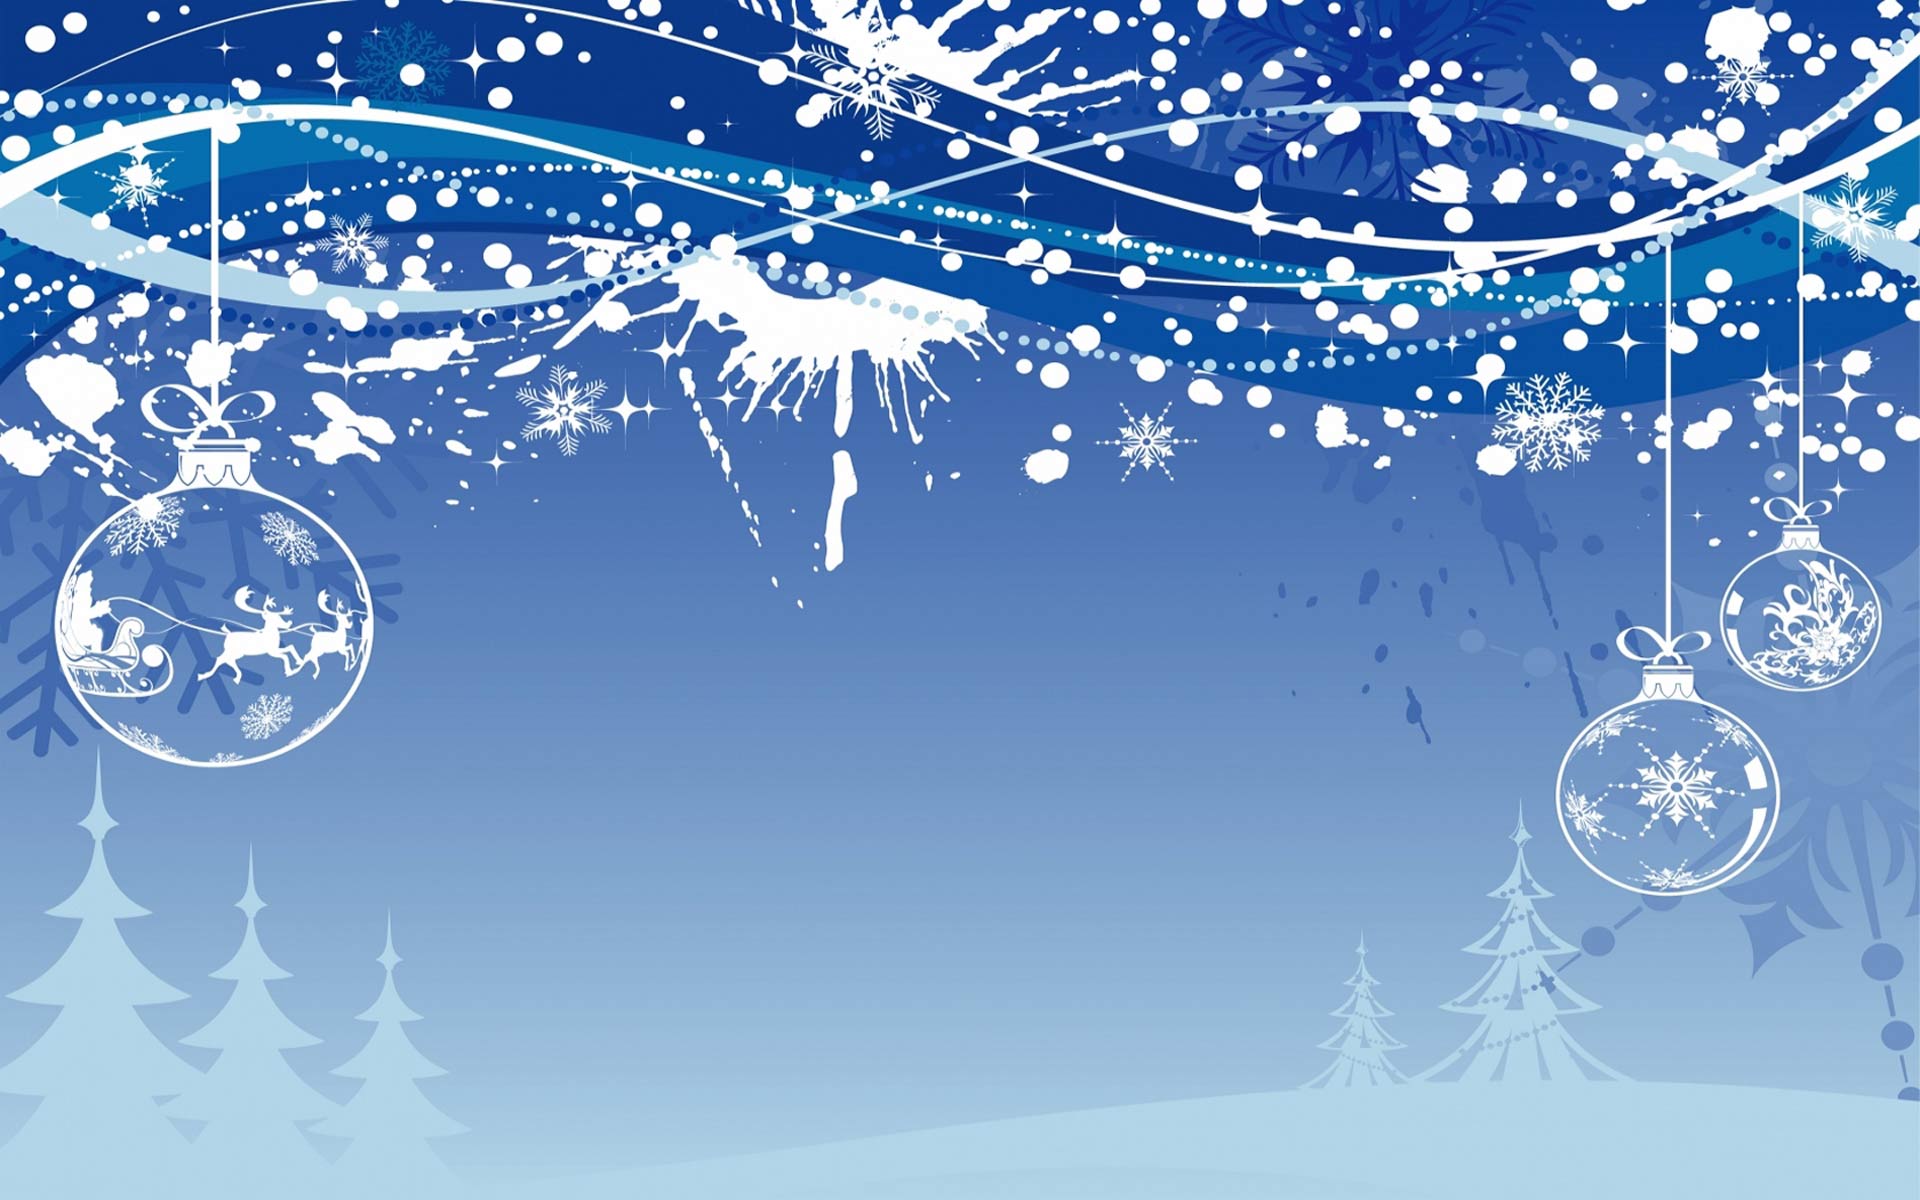 Free Christmas wallpaper for computer screen - photos, images